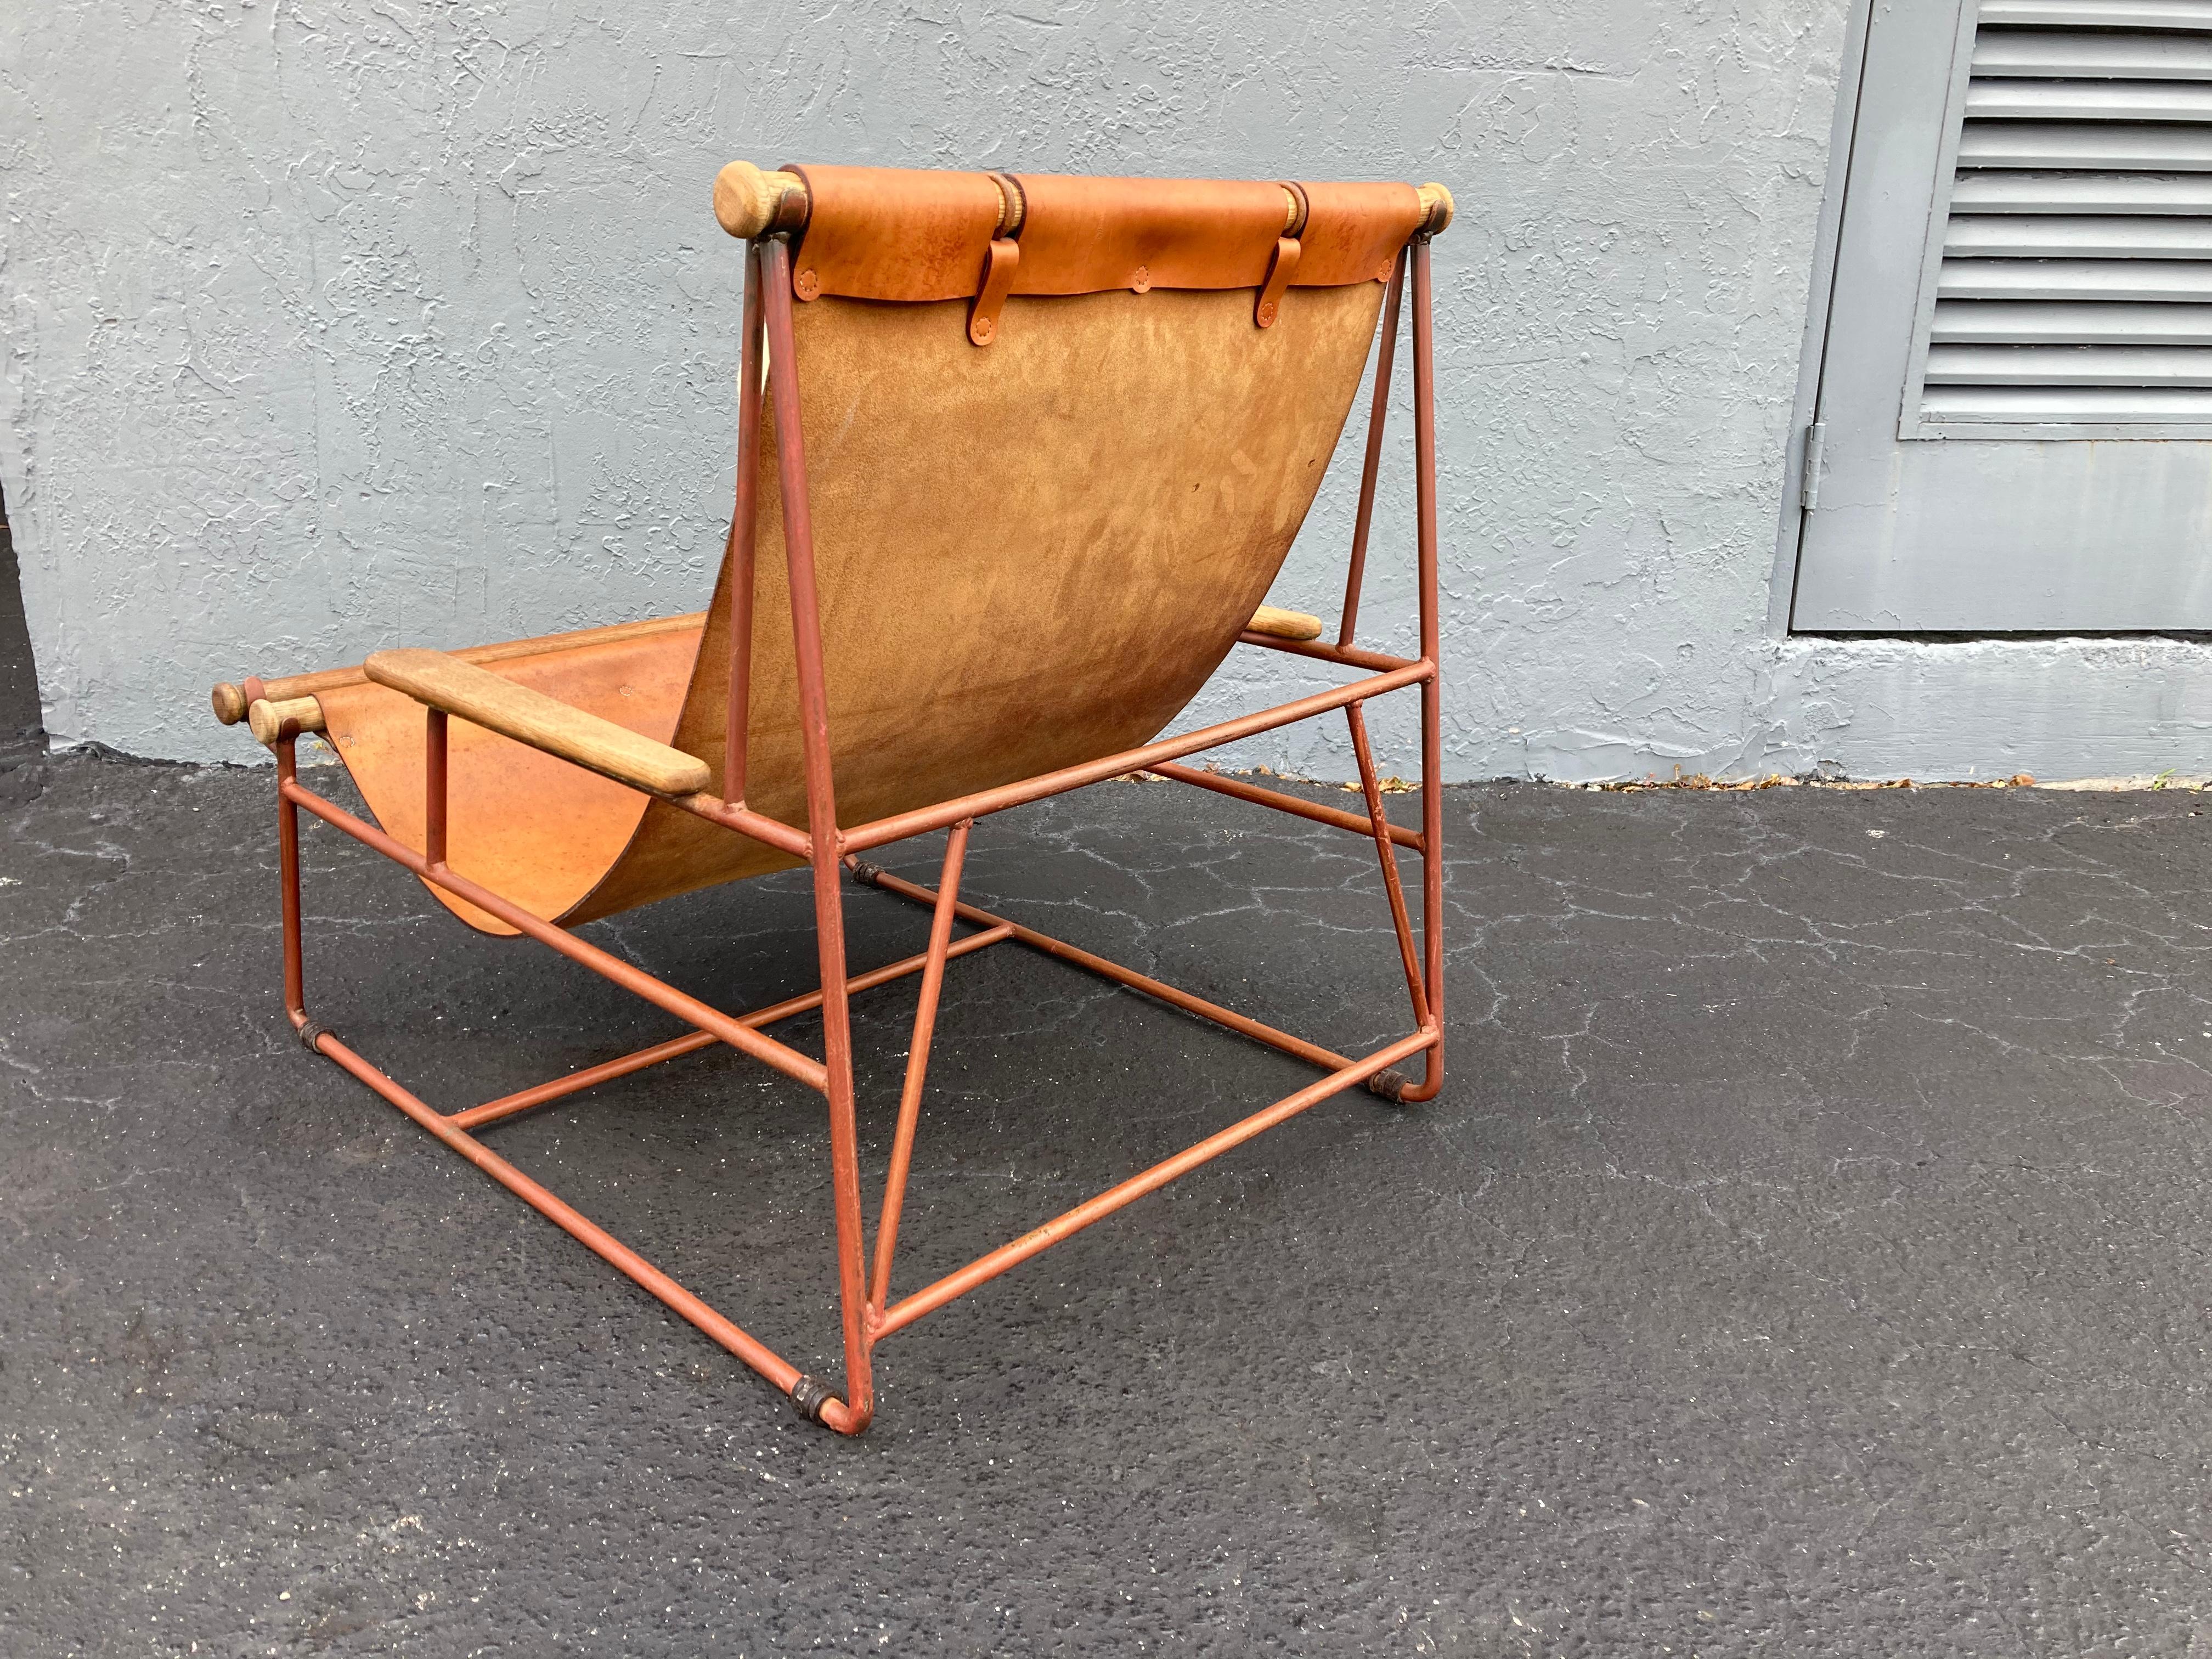 Contemporary Beautiful Deck Lounge Chair Designed by Tyler Hays and Made by BDDW, Leather